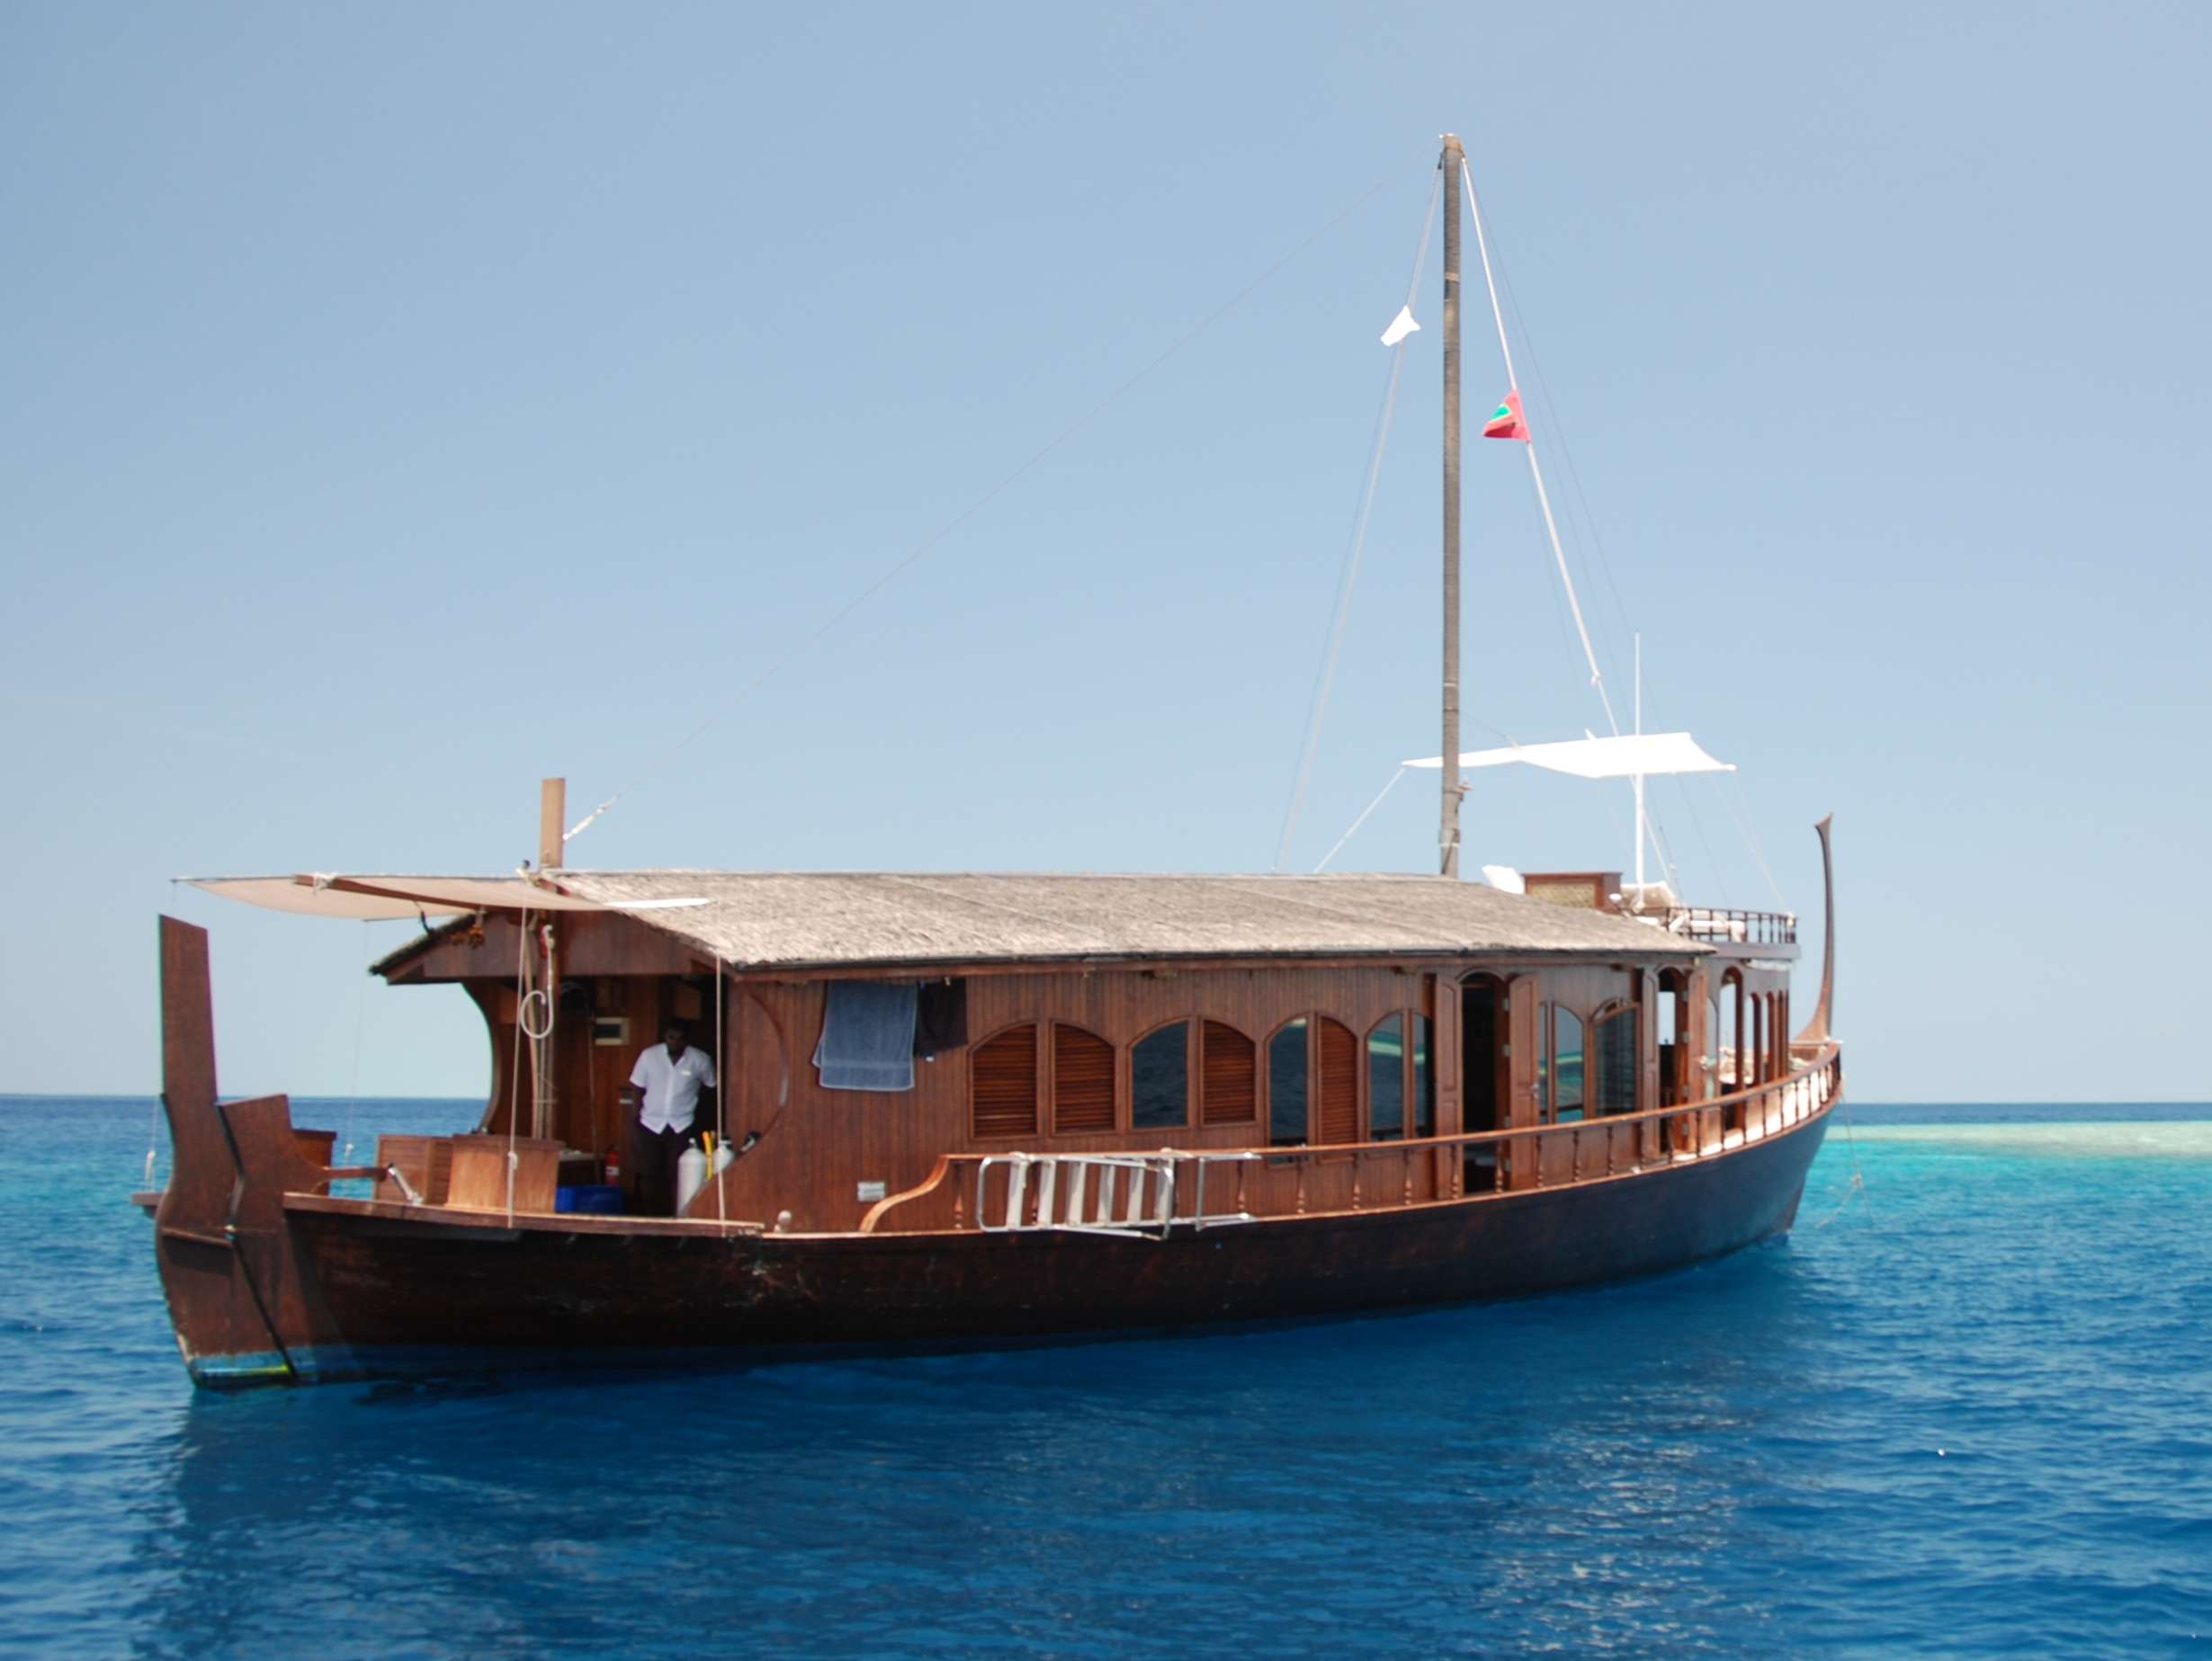 DHONI STELLA 2 - Yacht Charter Maldives & Boat hire in Indian Ocean & SE Asia 4